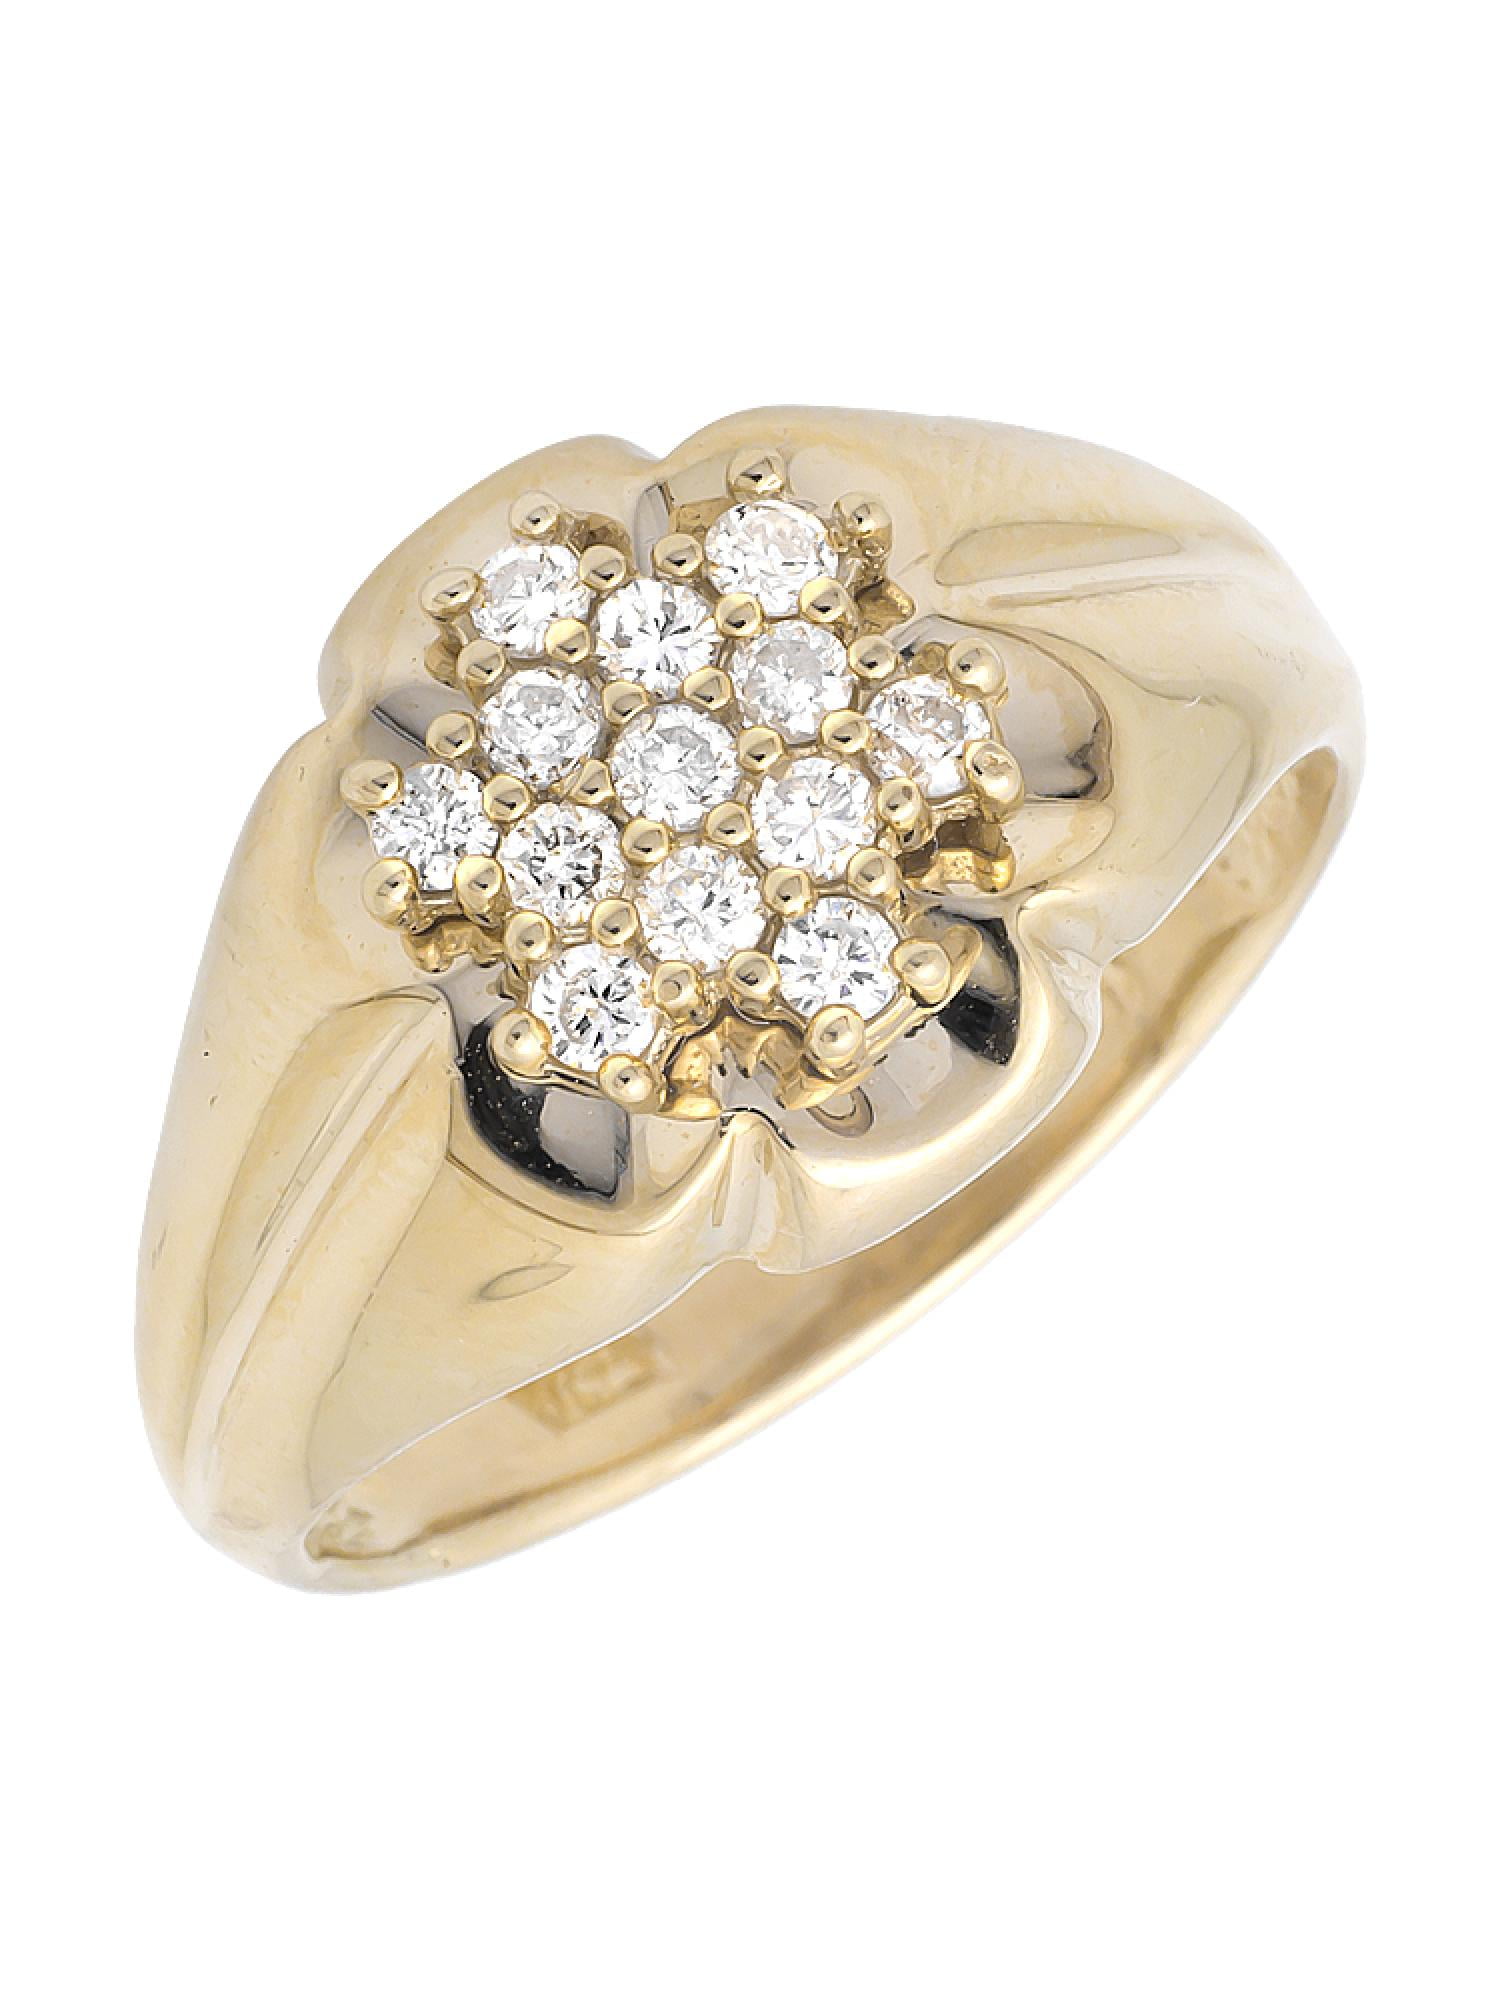 Jewelry Unlimited Men S 14k Yellow Gold Flower Cluster Vintage | Free ...